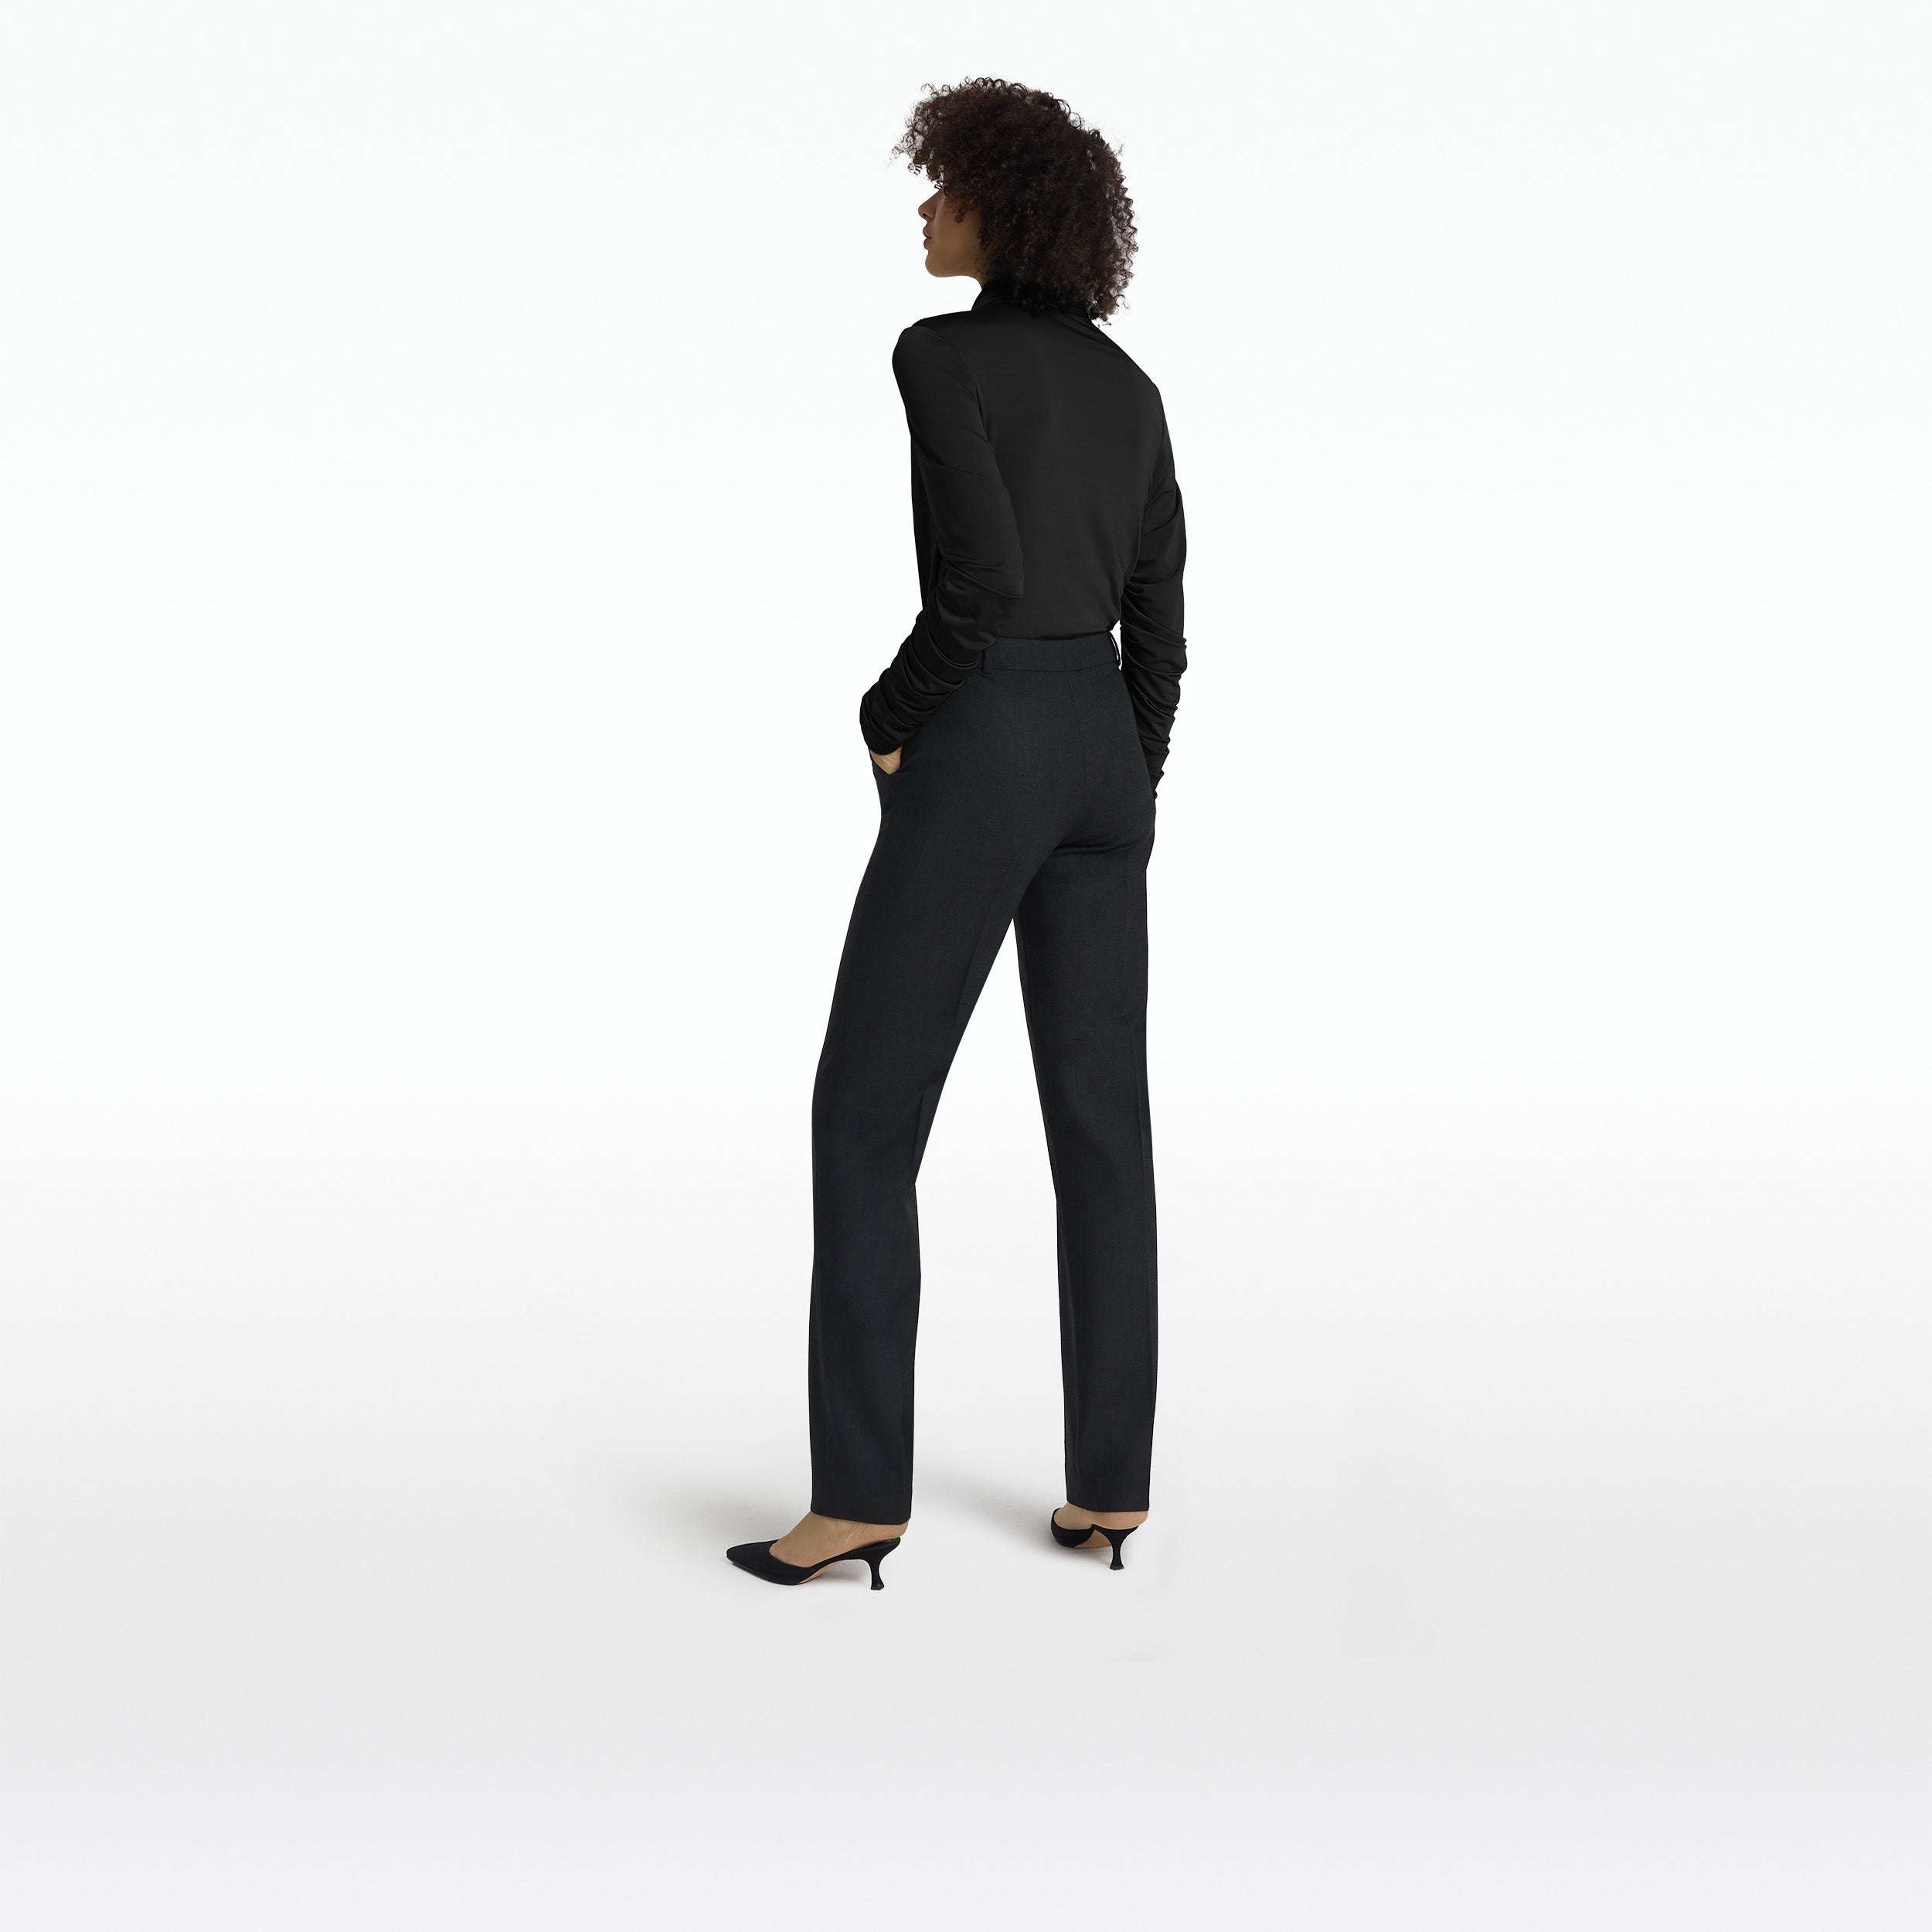 Trista Charcoal Trousers